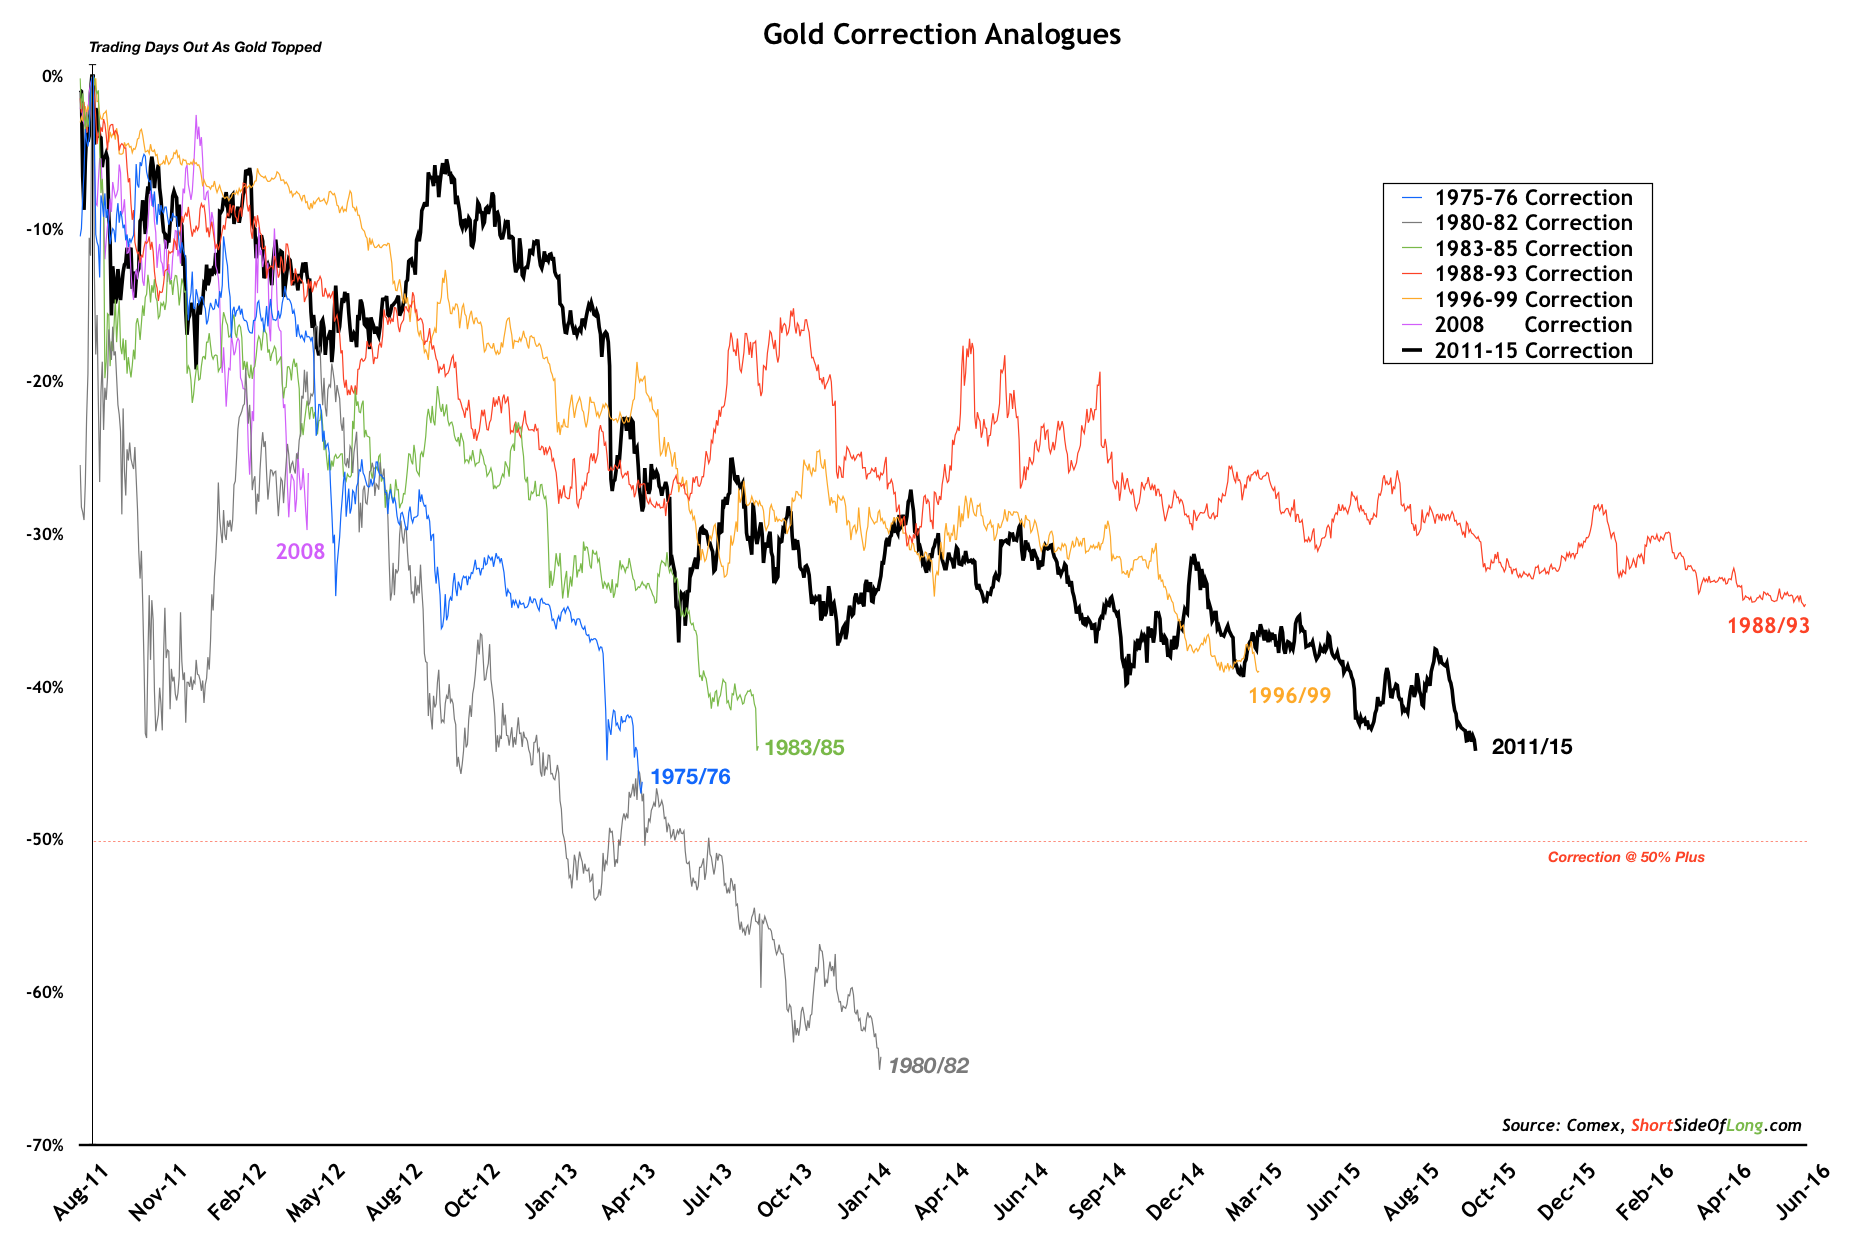 Gold 2011-2015 with Correction Analogues